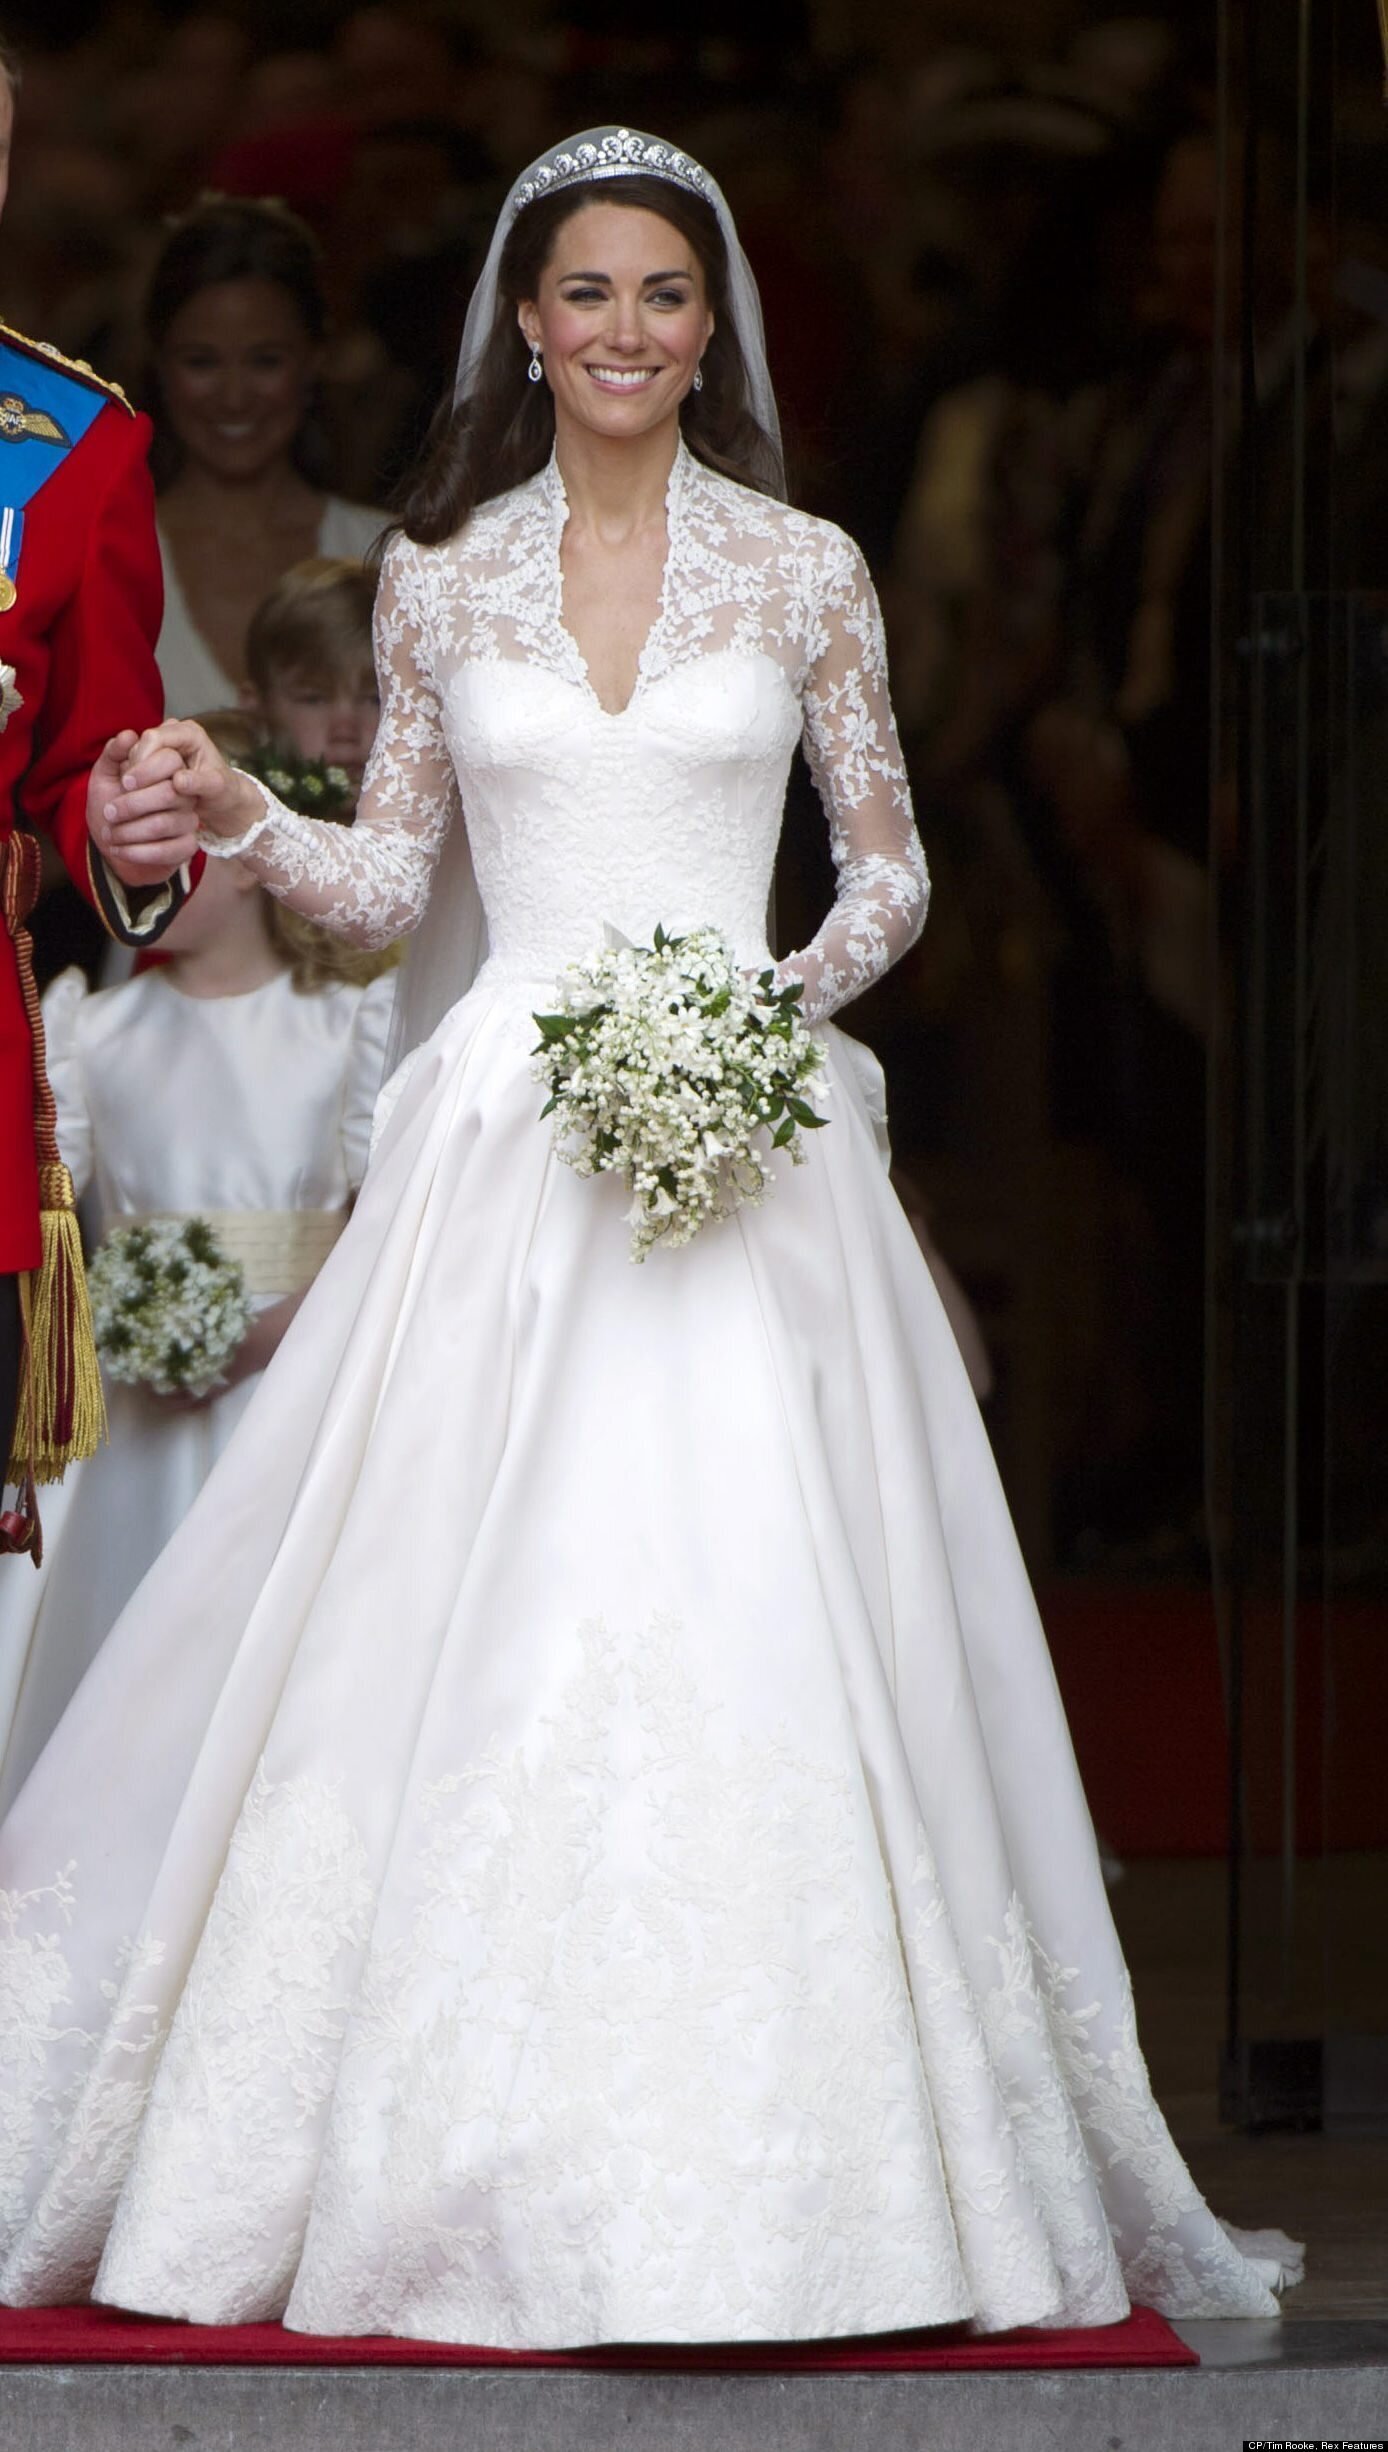 A history of the Royal bridal outfit | Luxury Lifestyle Magazine